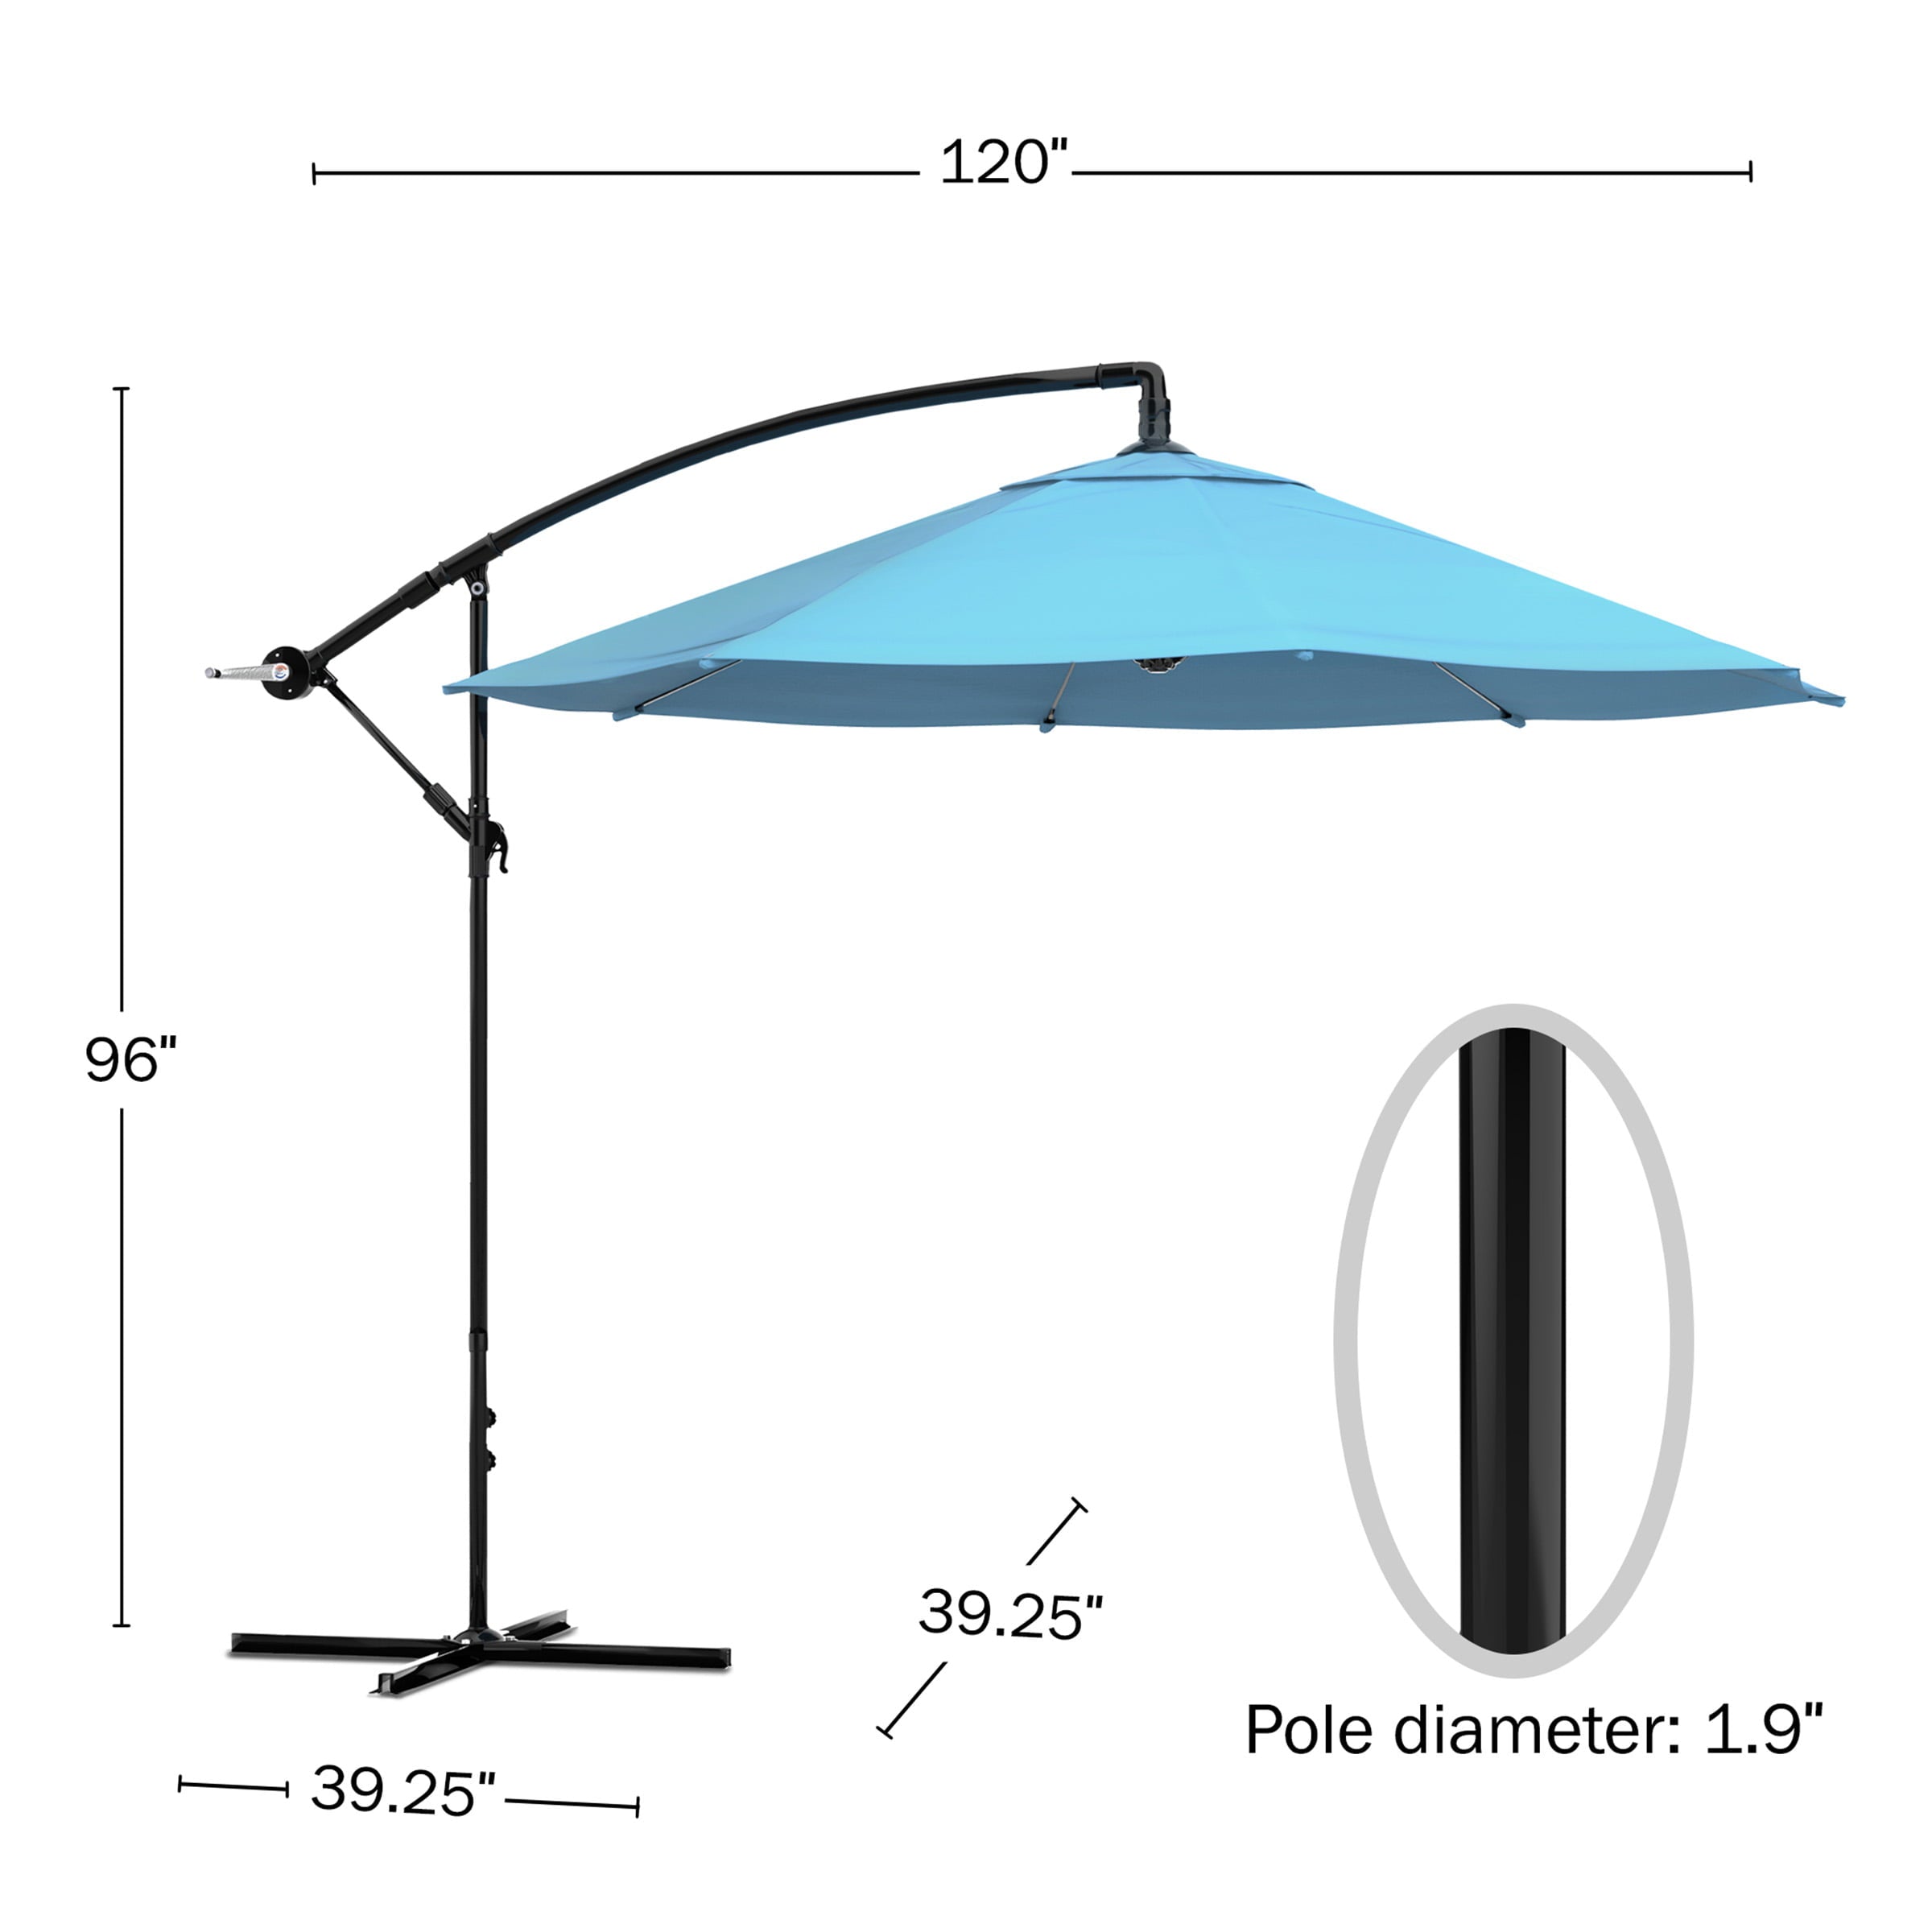 Patio Umbrella, Cantilever Hanging Outdoor Shade, Easy Crank and Base for Table, Deck, Balcony, Porch, Backyard, Pool 10 Foot by Pure Garden (Blue)